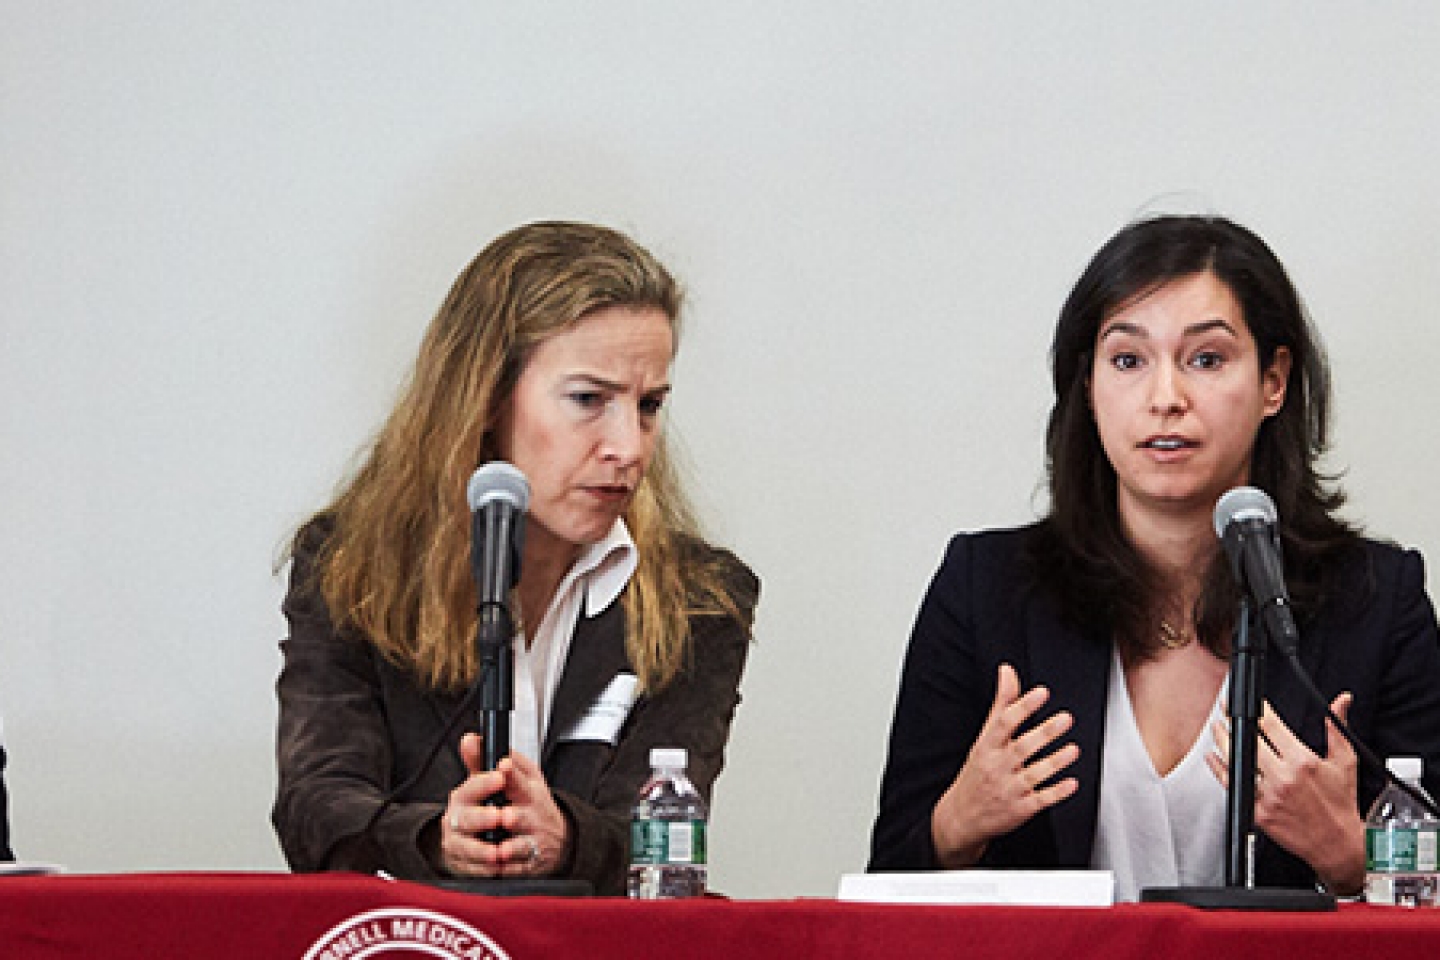 Weill Cornell Medicine physicians spoke about a wide range of topics at the Women’s Health Summit, which took place at the 92nd Street Y on April 29, 2018.